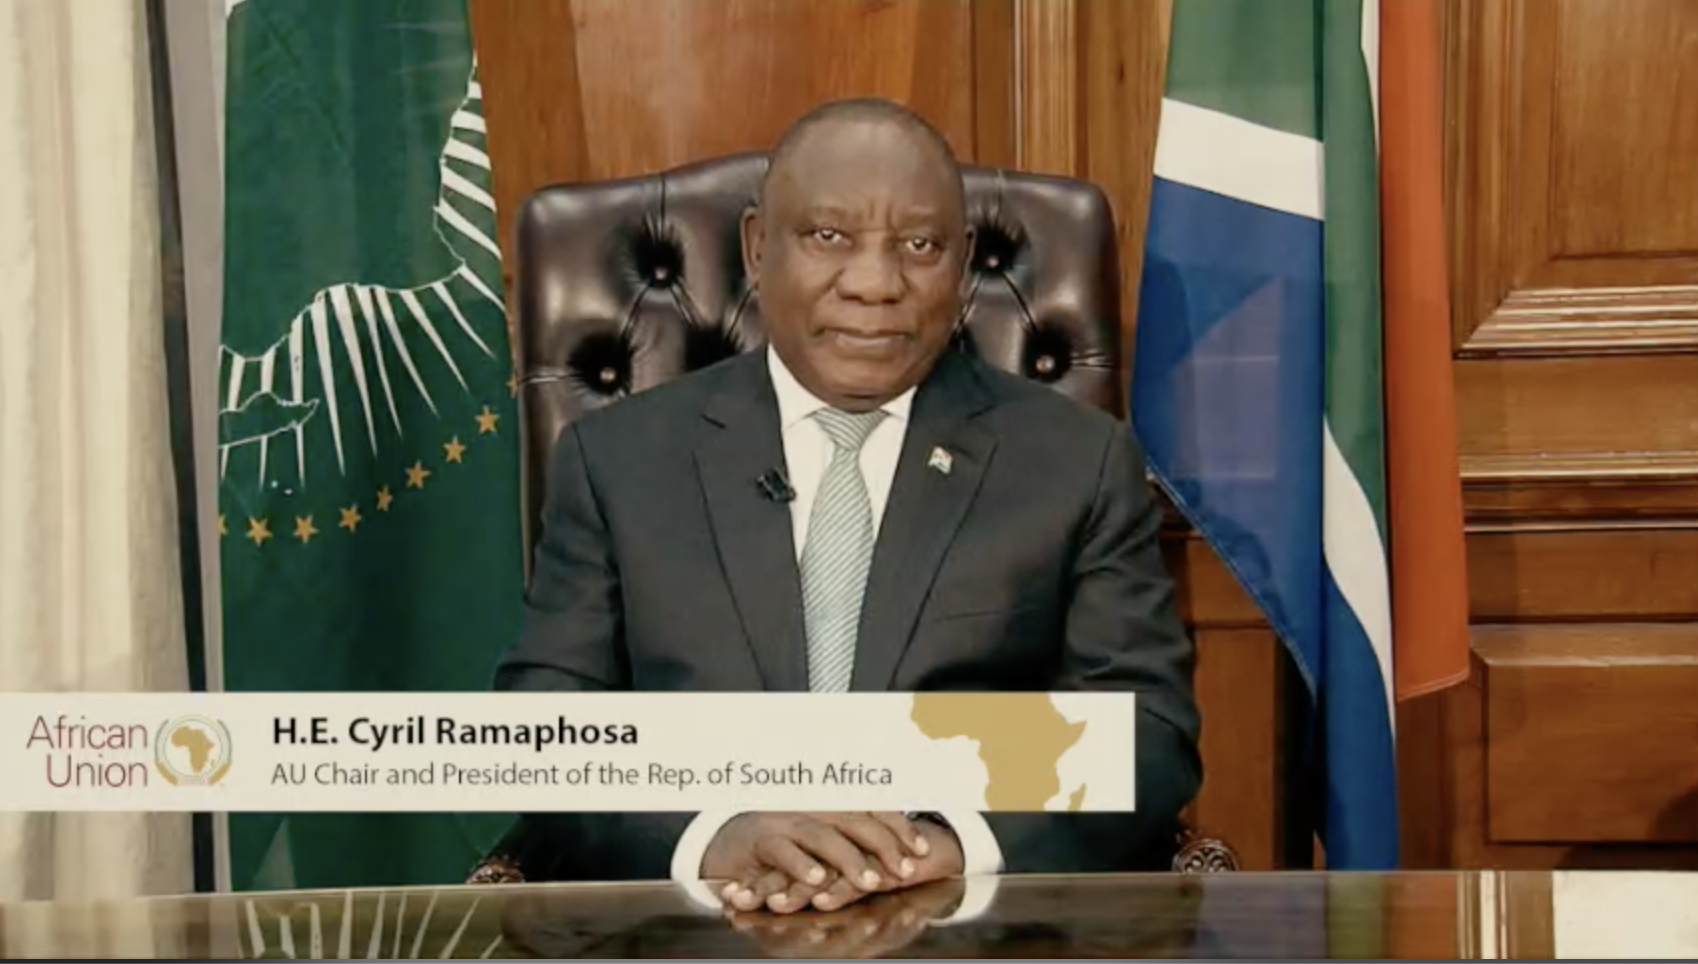 Statement Delivered On Behalf Of The Au Chairperson President Cyril Ramaphosa On The Occasion Of The Handover Ceremony Of The Afcfta Secretariat African Union